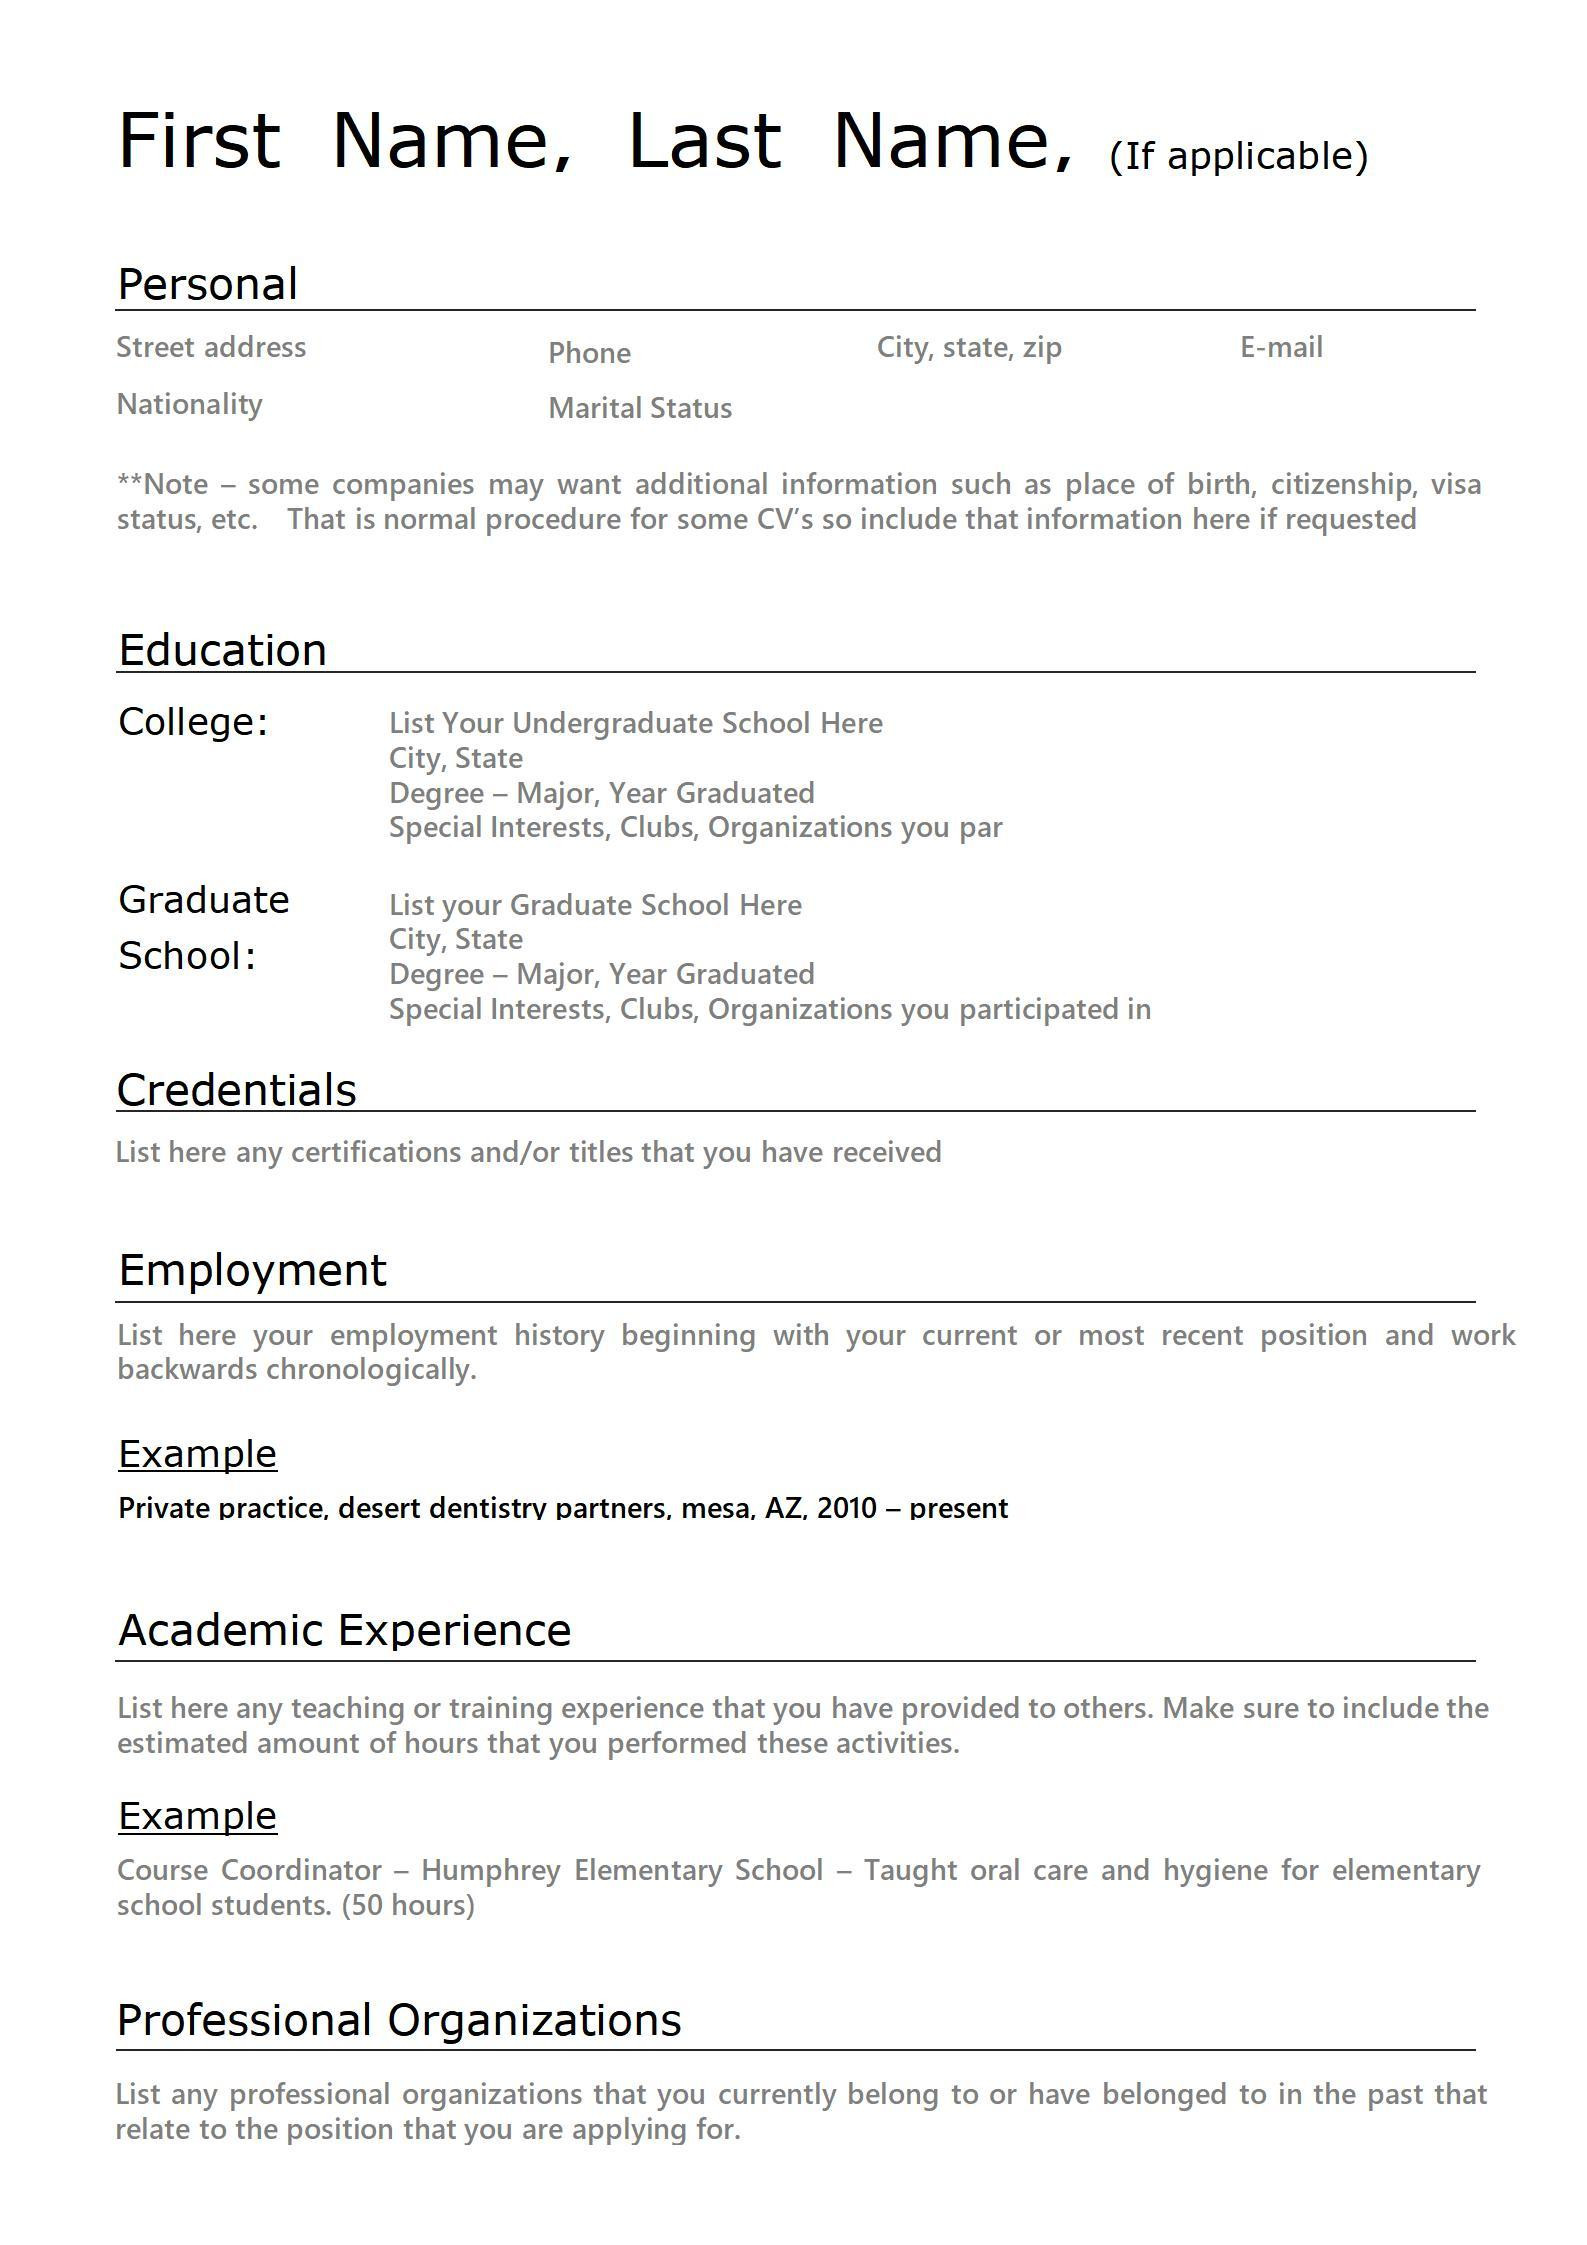 First Time Resume with No Experience Sample Australia First-time Resume with No Experience Samples Wps Office Academy